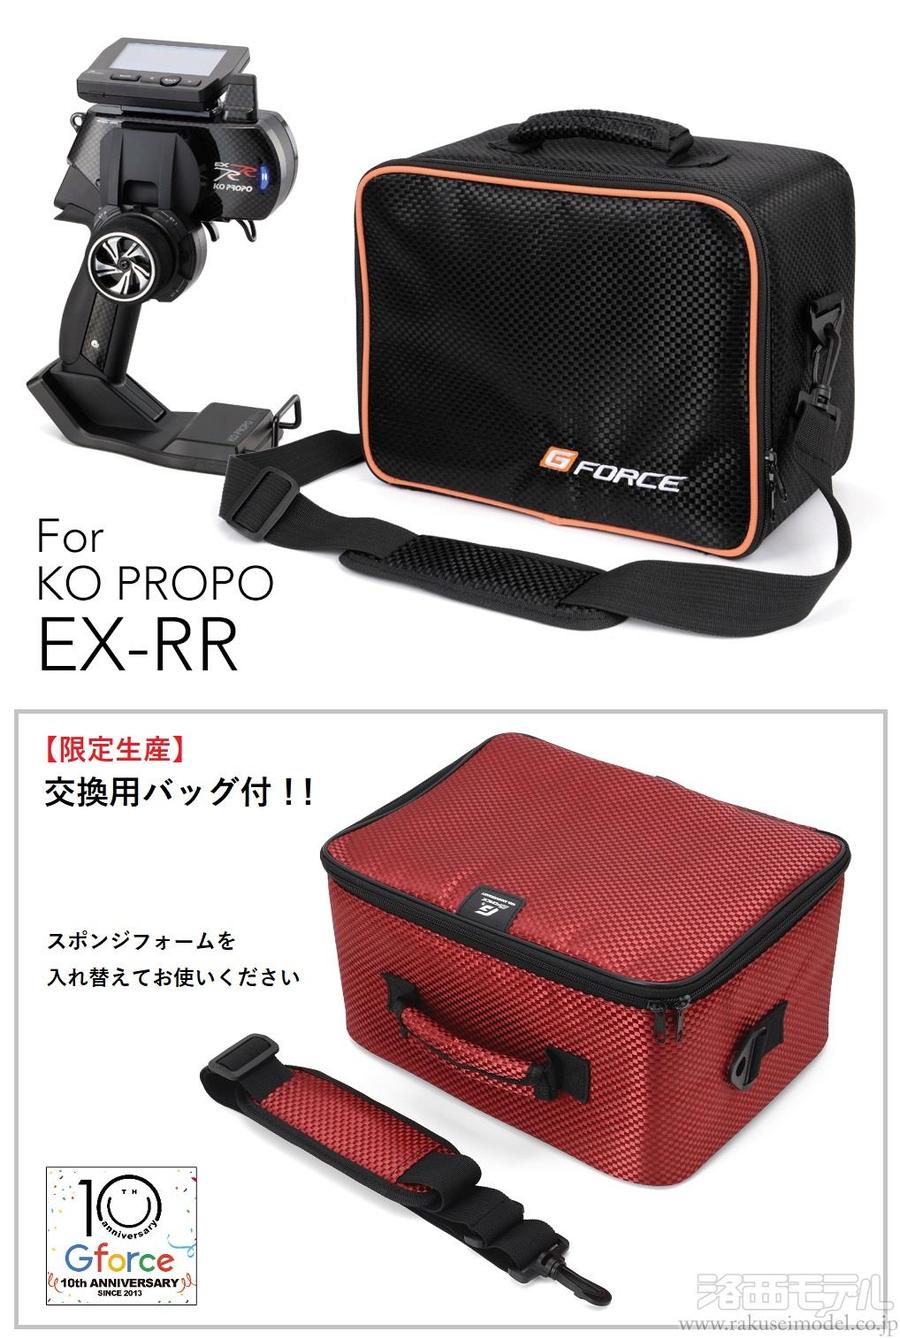 G-FORCE ジーフォース TX Bag for 4PM(プロポバッグ4PM用) G0324